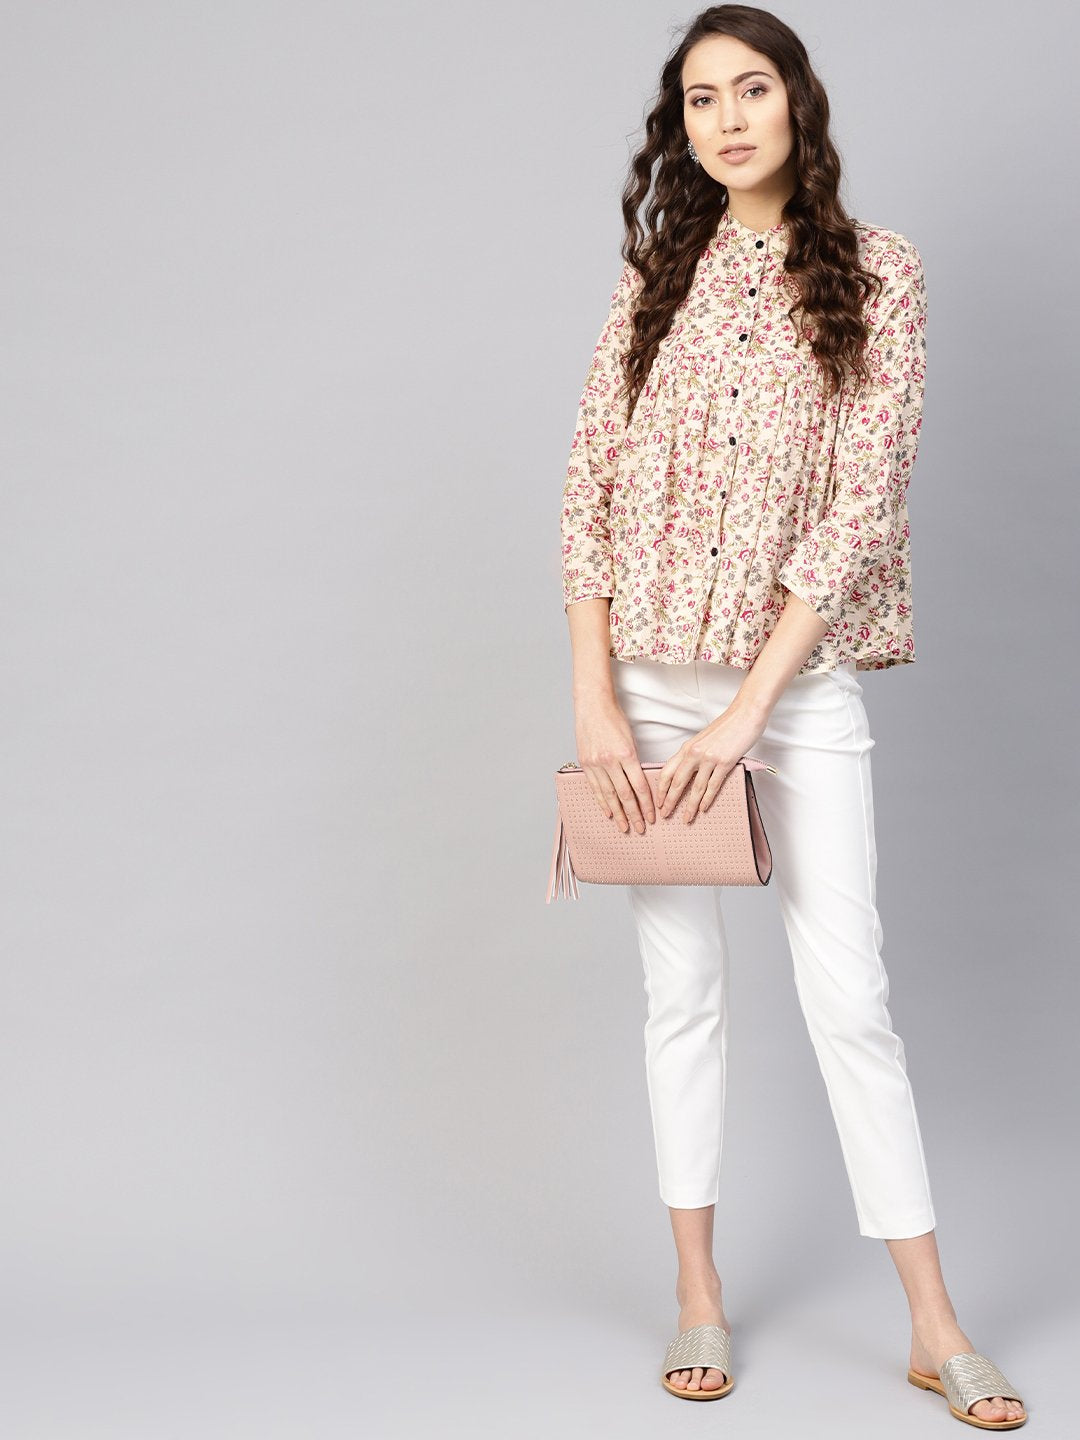 Women's Beige & Pink Printed Shirt Style Top - Nayo Clothing